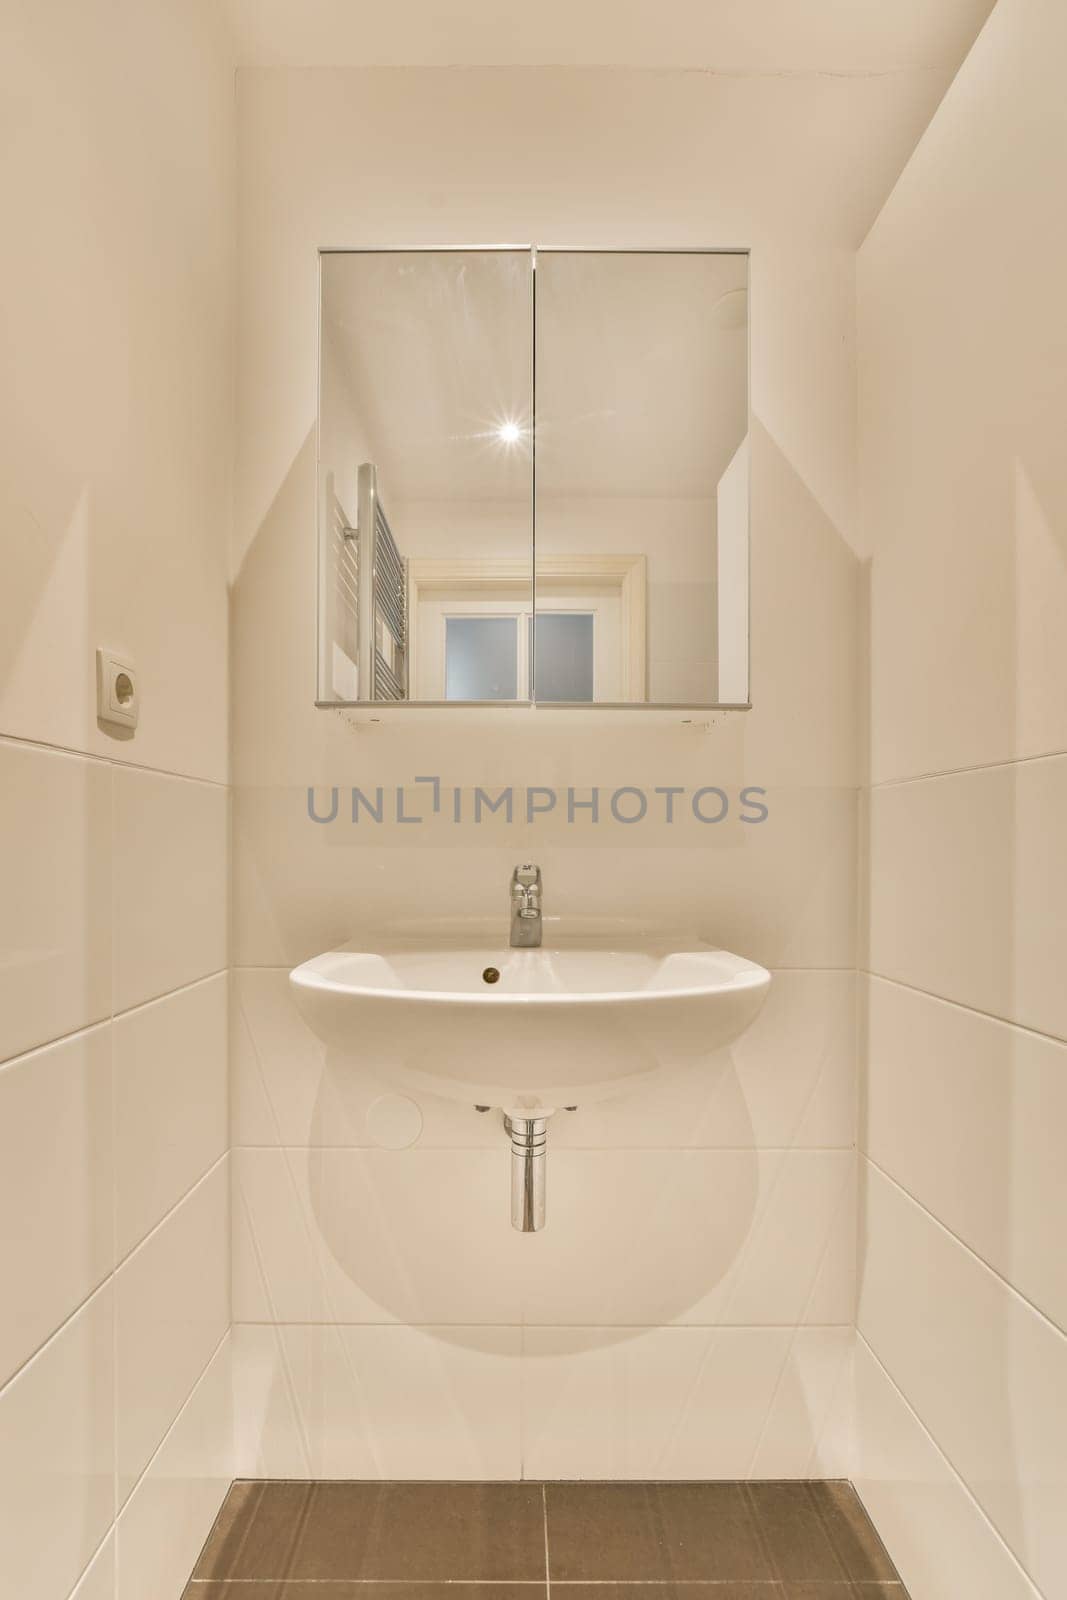 a bathroom with a sink and mirror on the wall, in front of it is a tiled floor that looks very clean